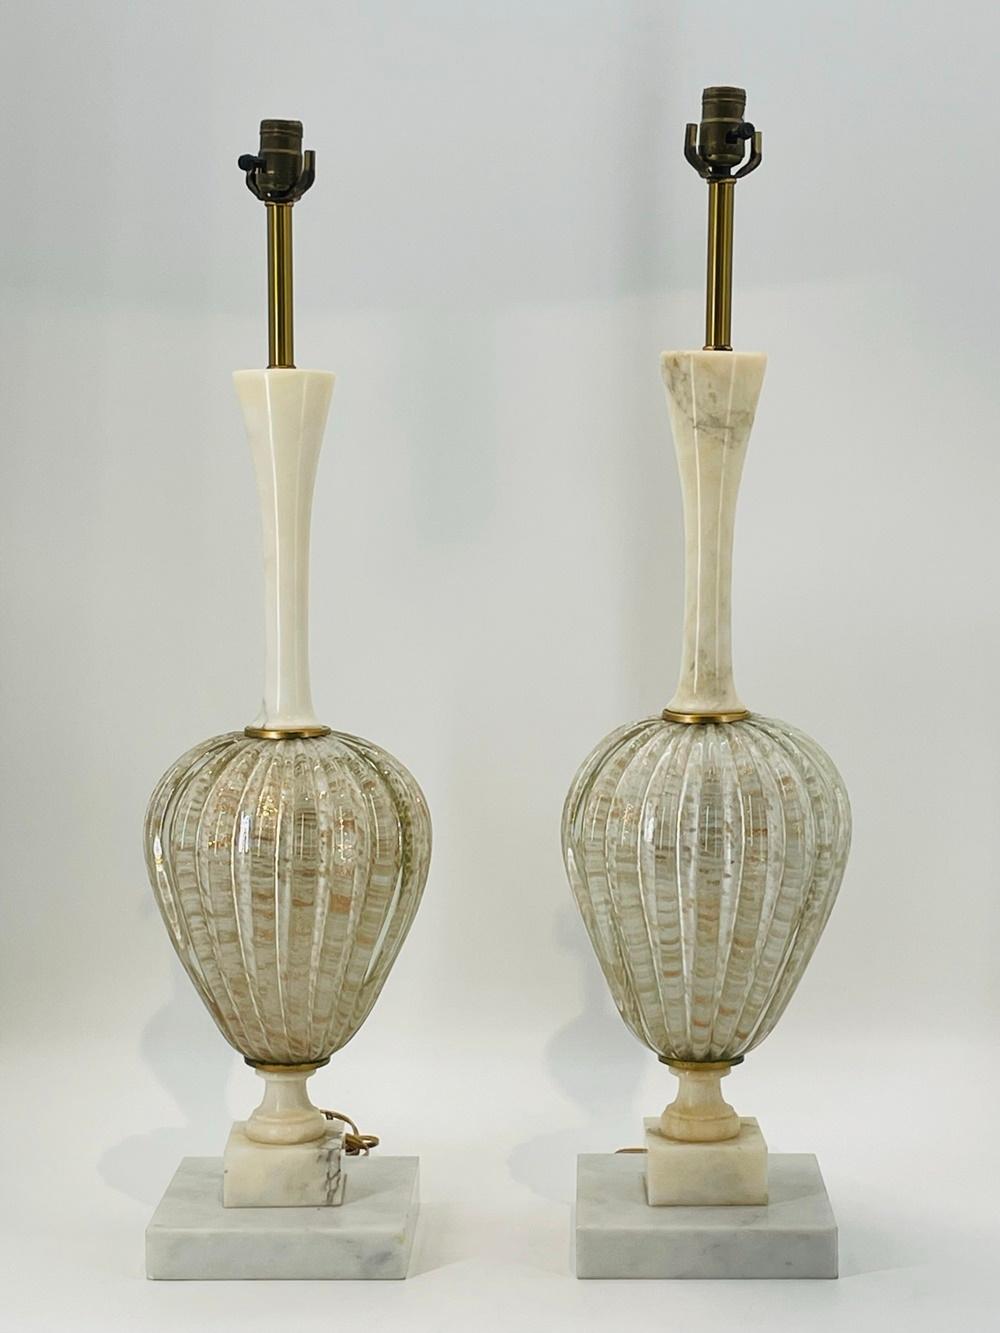 Hand-Crafted Pair of Murano Glass & Alabaster Table Lamps, Italy 1960's For Sale